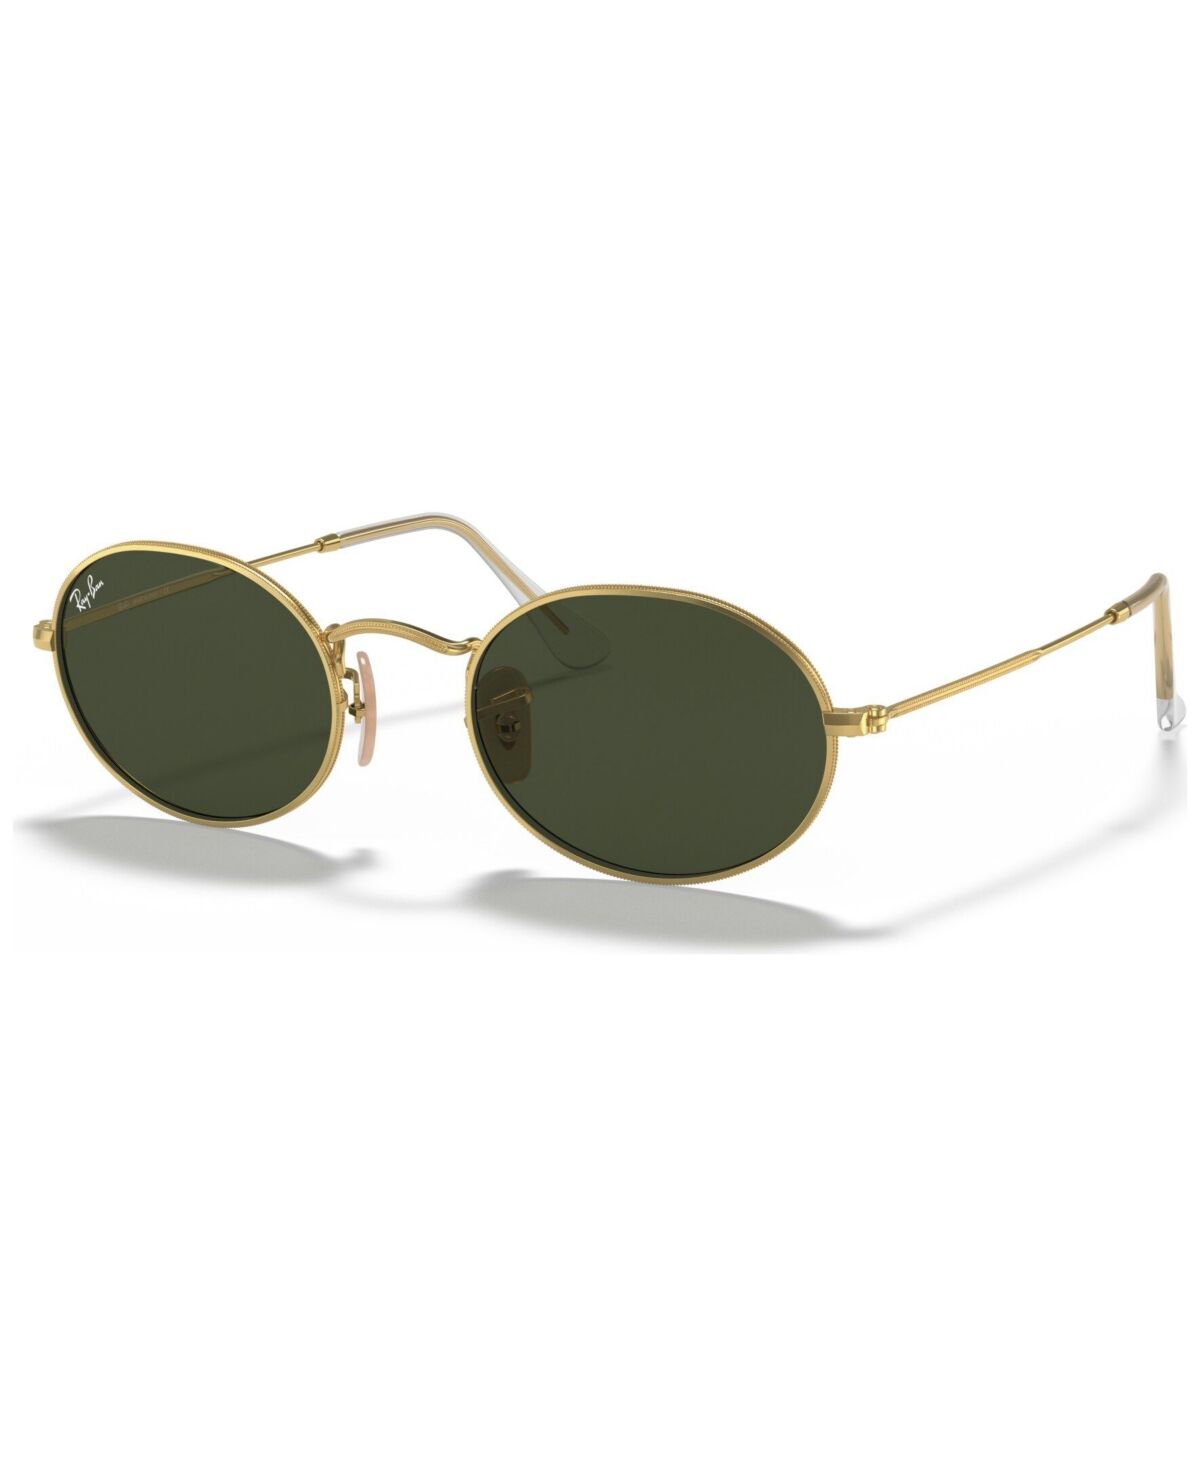 Ray-Ban Sunglasses, RB3547 54 - GOLD/GREEN